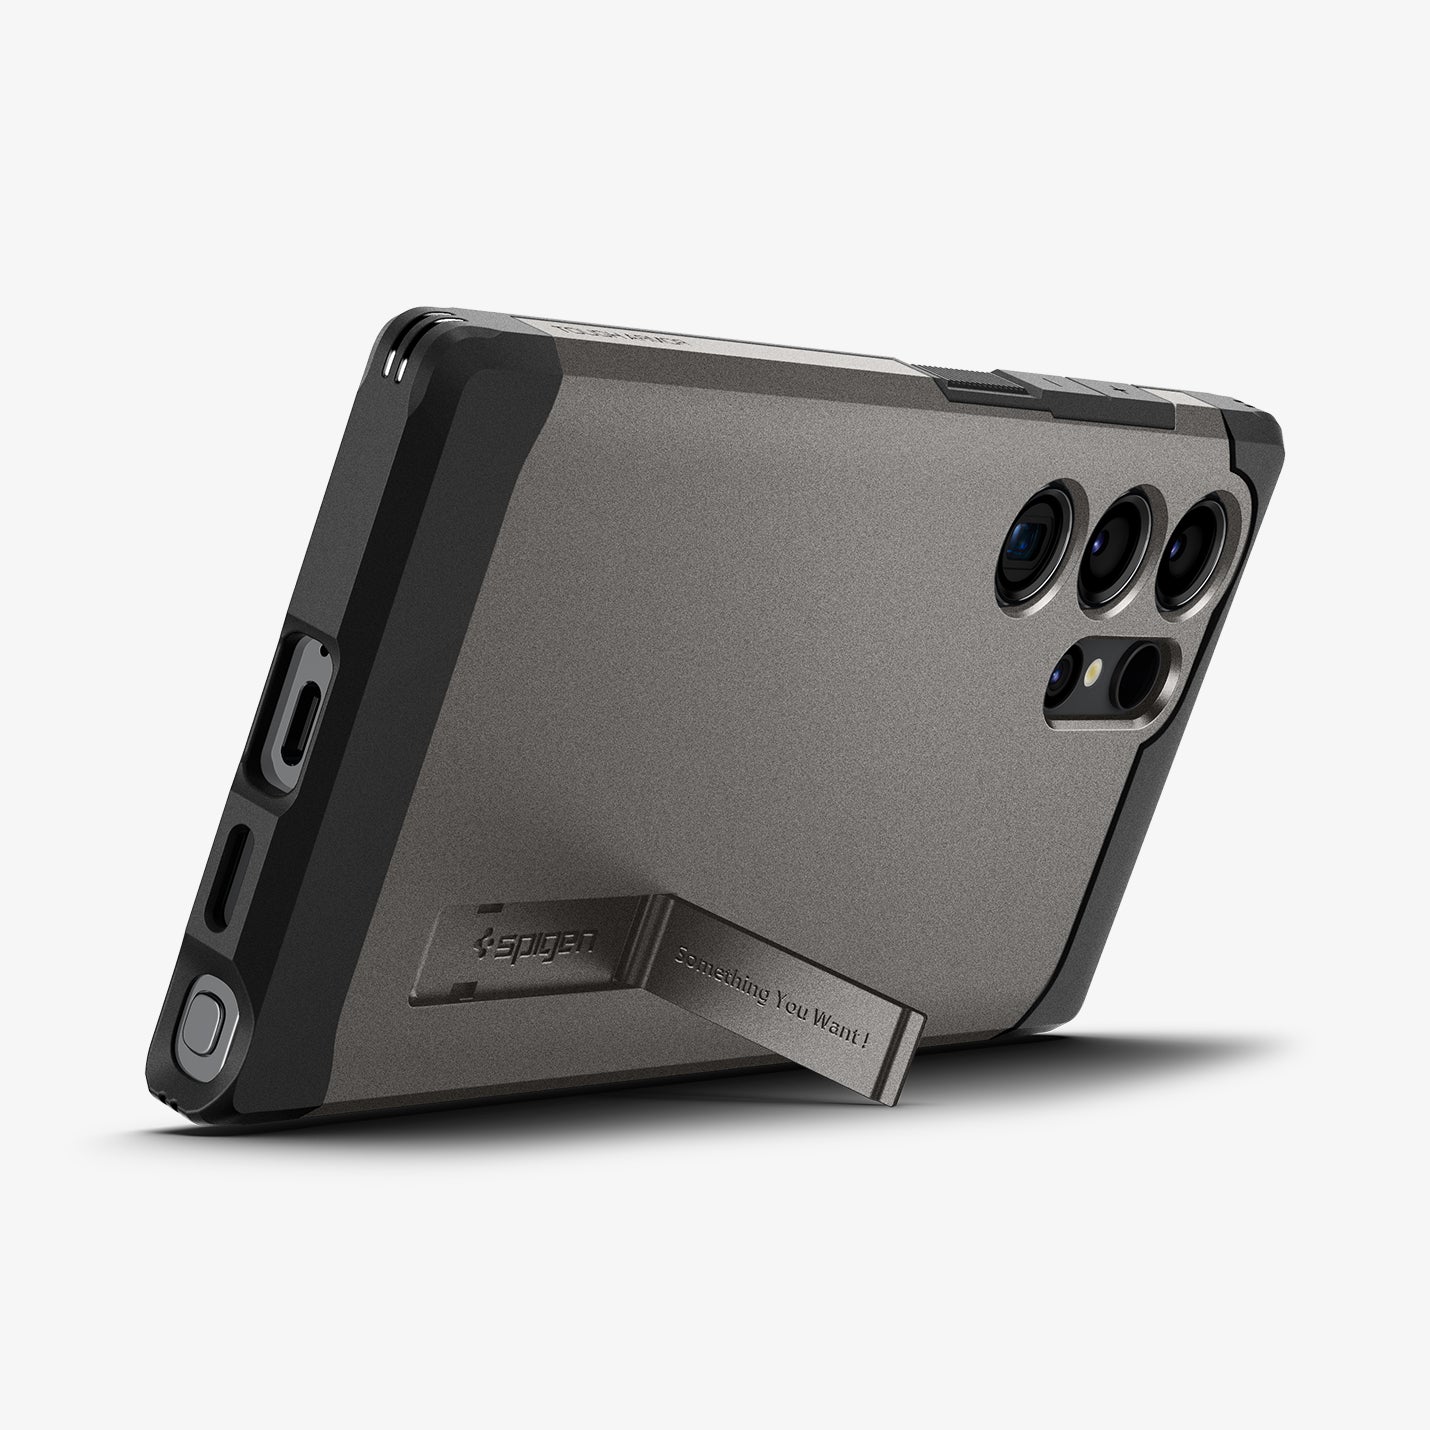 ACS07301 - Galaxy S24 Ultra Case Tough Armor in Gunmetal showing the back, partial side and bottom with a built-in kickstand propped up